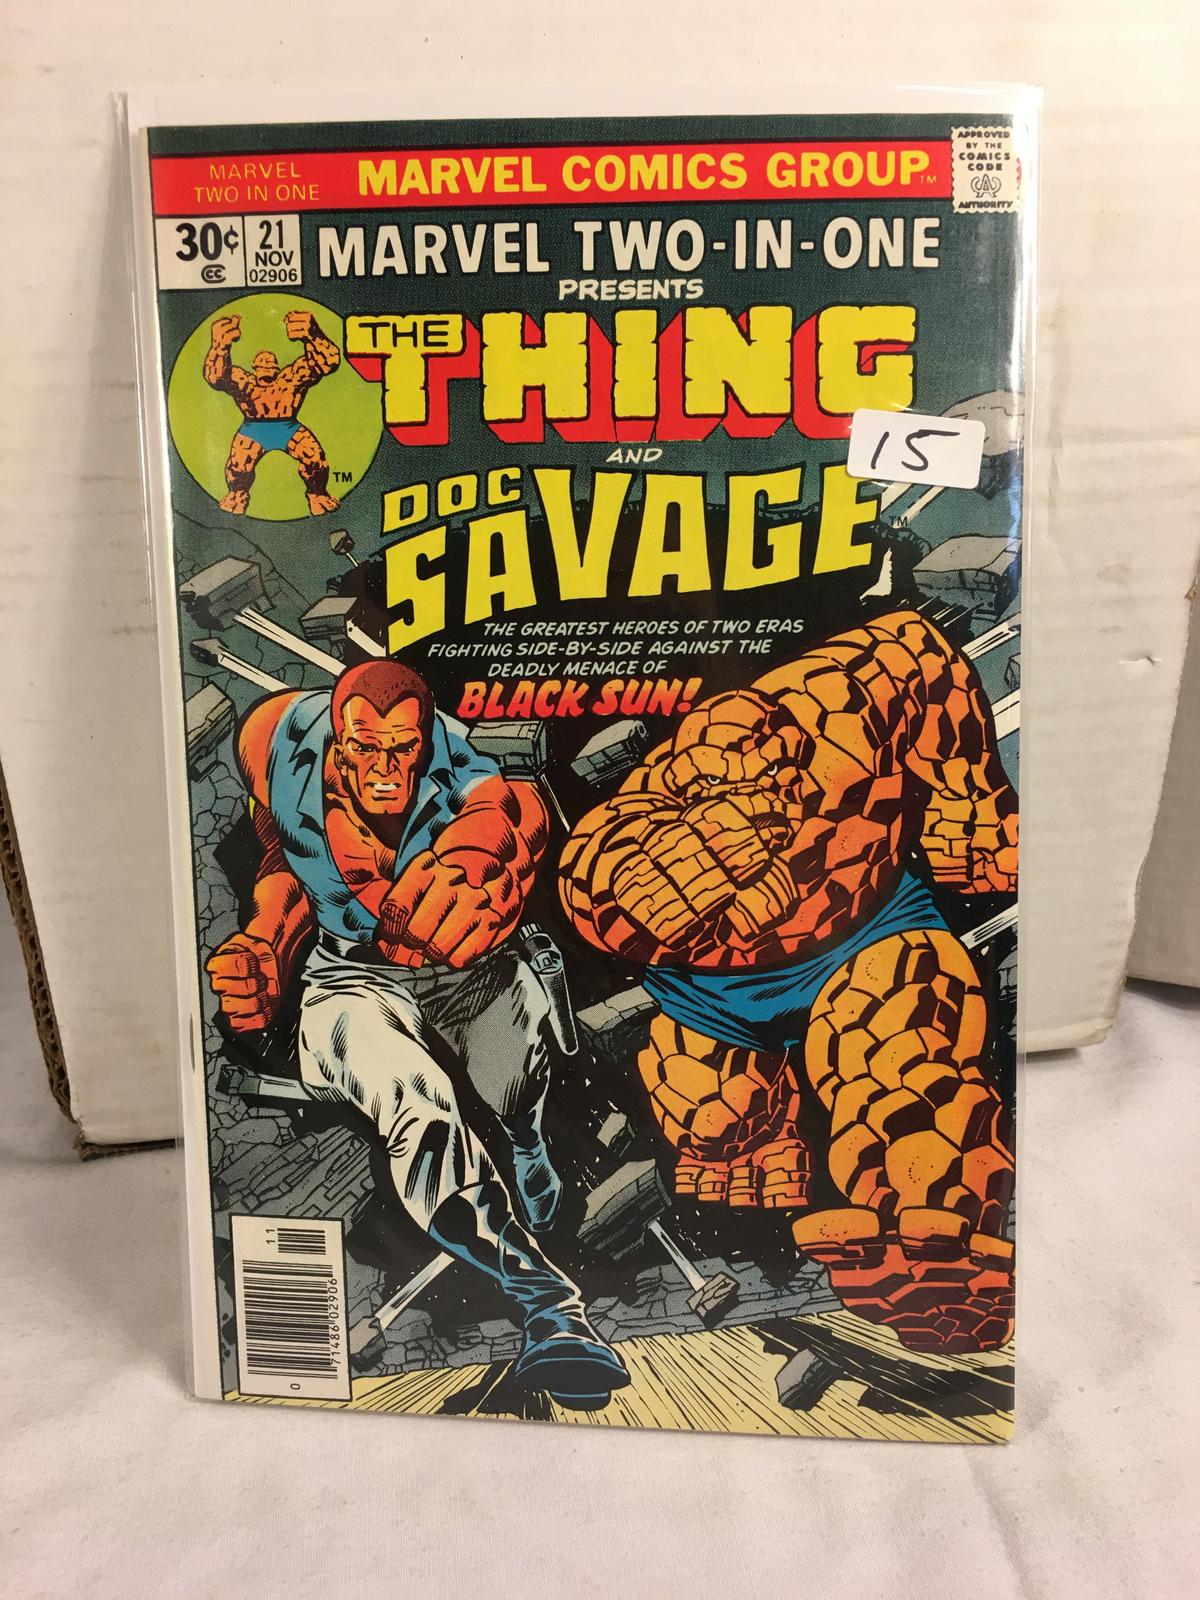 Collector Vintage Marvel Two-In-One The Thing and Doc Savage Comic Book No.21